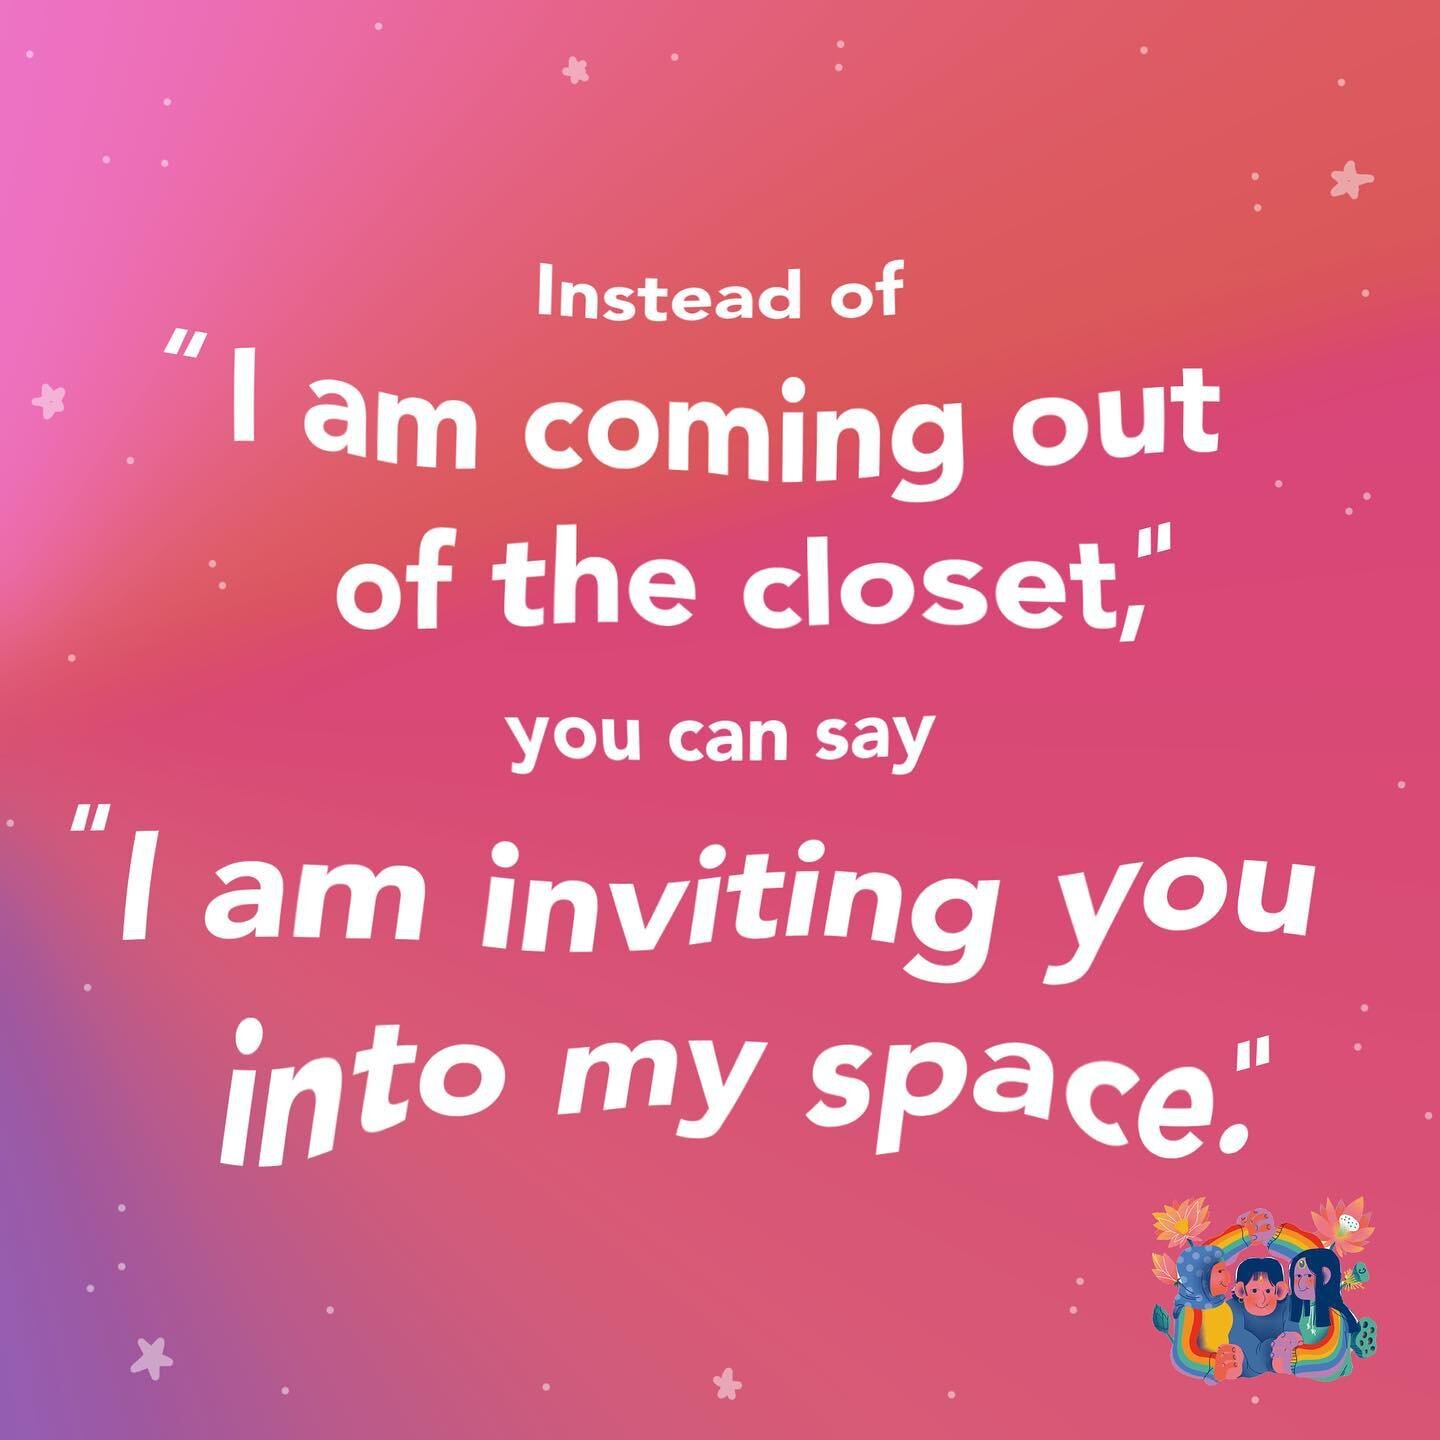 Someone recently brought this up in our virtual support group meetings! There is so much anxiety and stress around coming out. Change the narrative it and reframe it based on your own terms 🌈💫 #comingout #lgbtq #lgbt #gay #trans #pride #queer